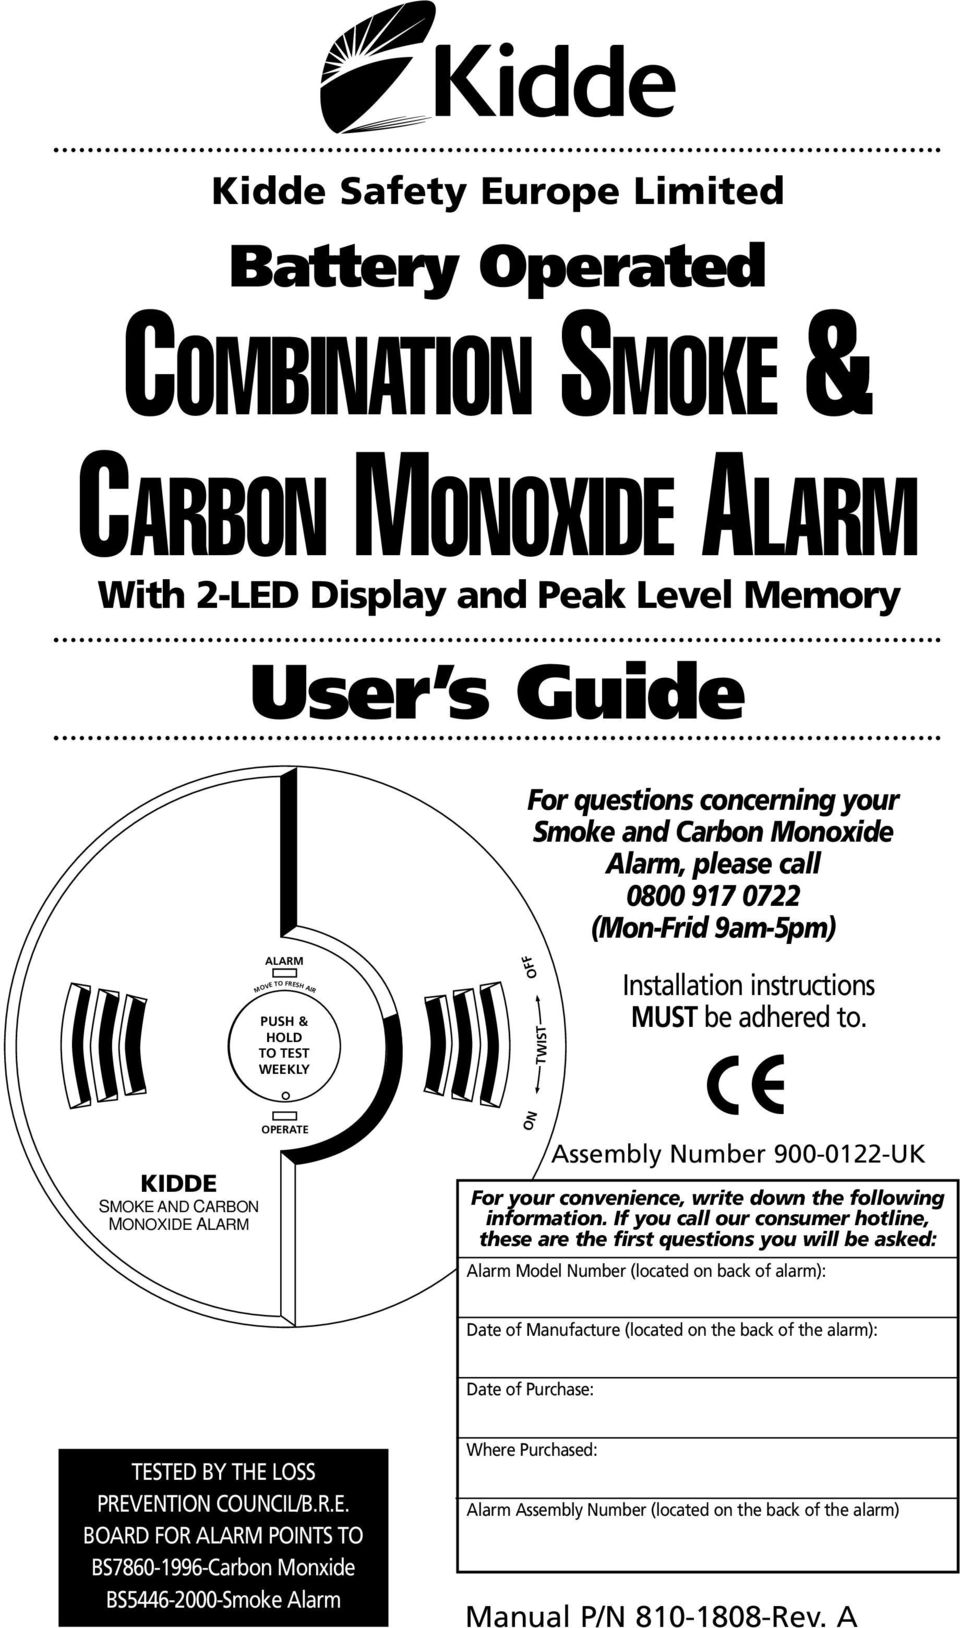 KIDDE SMOKE AND CARBON MONOXIDE ALARM OPERATE ON Assembly Number 900-0122-UK For your convenience, write down the following information.